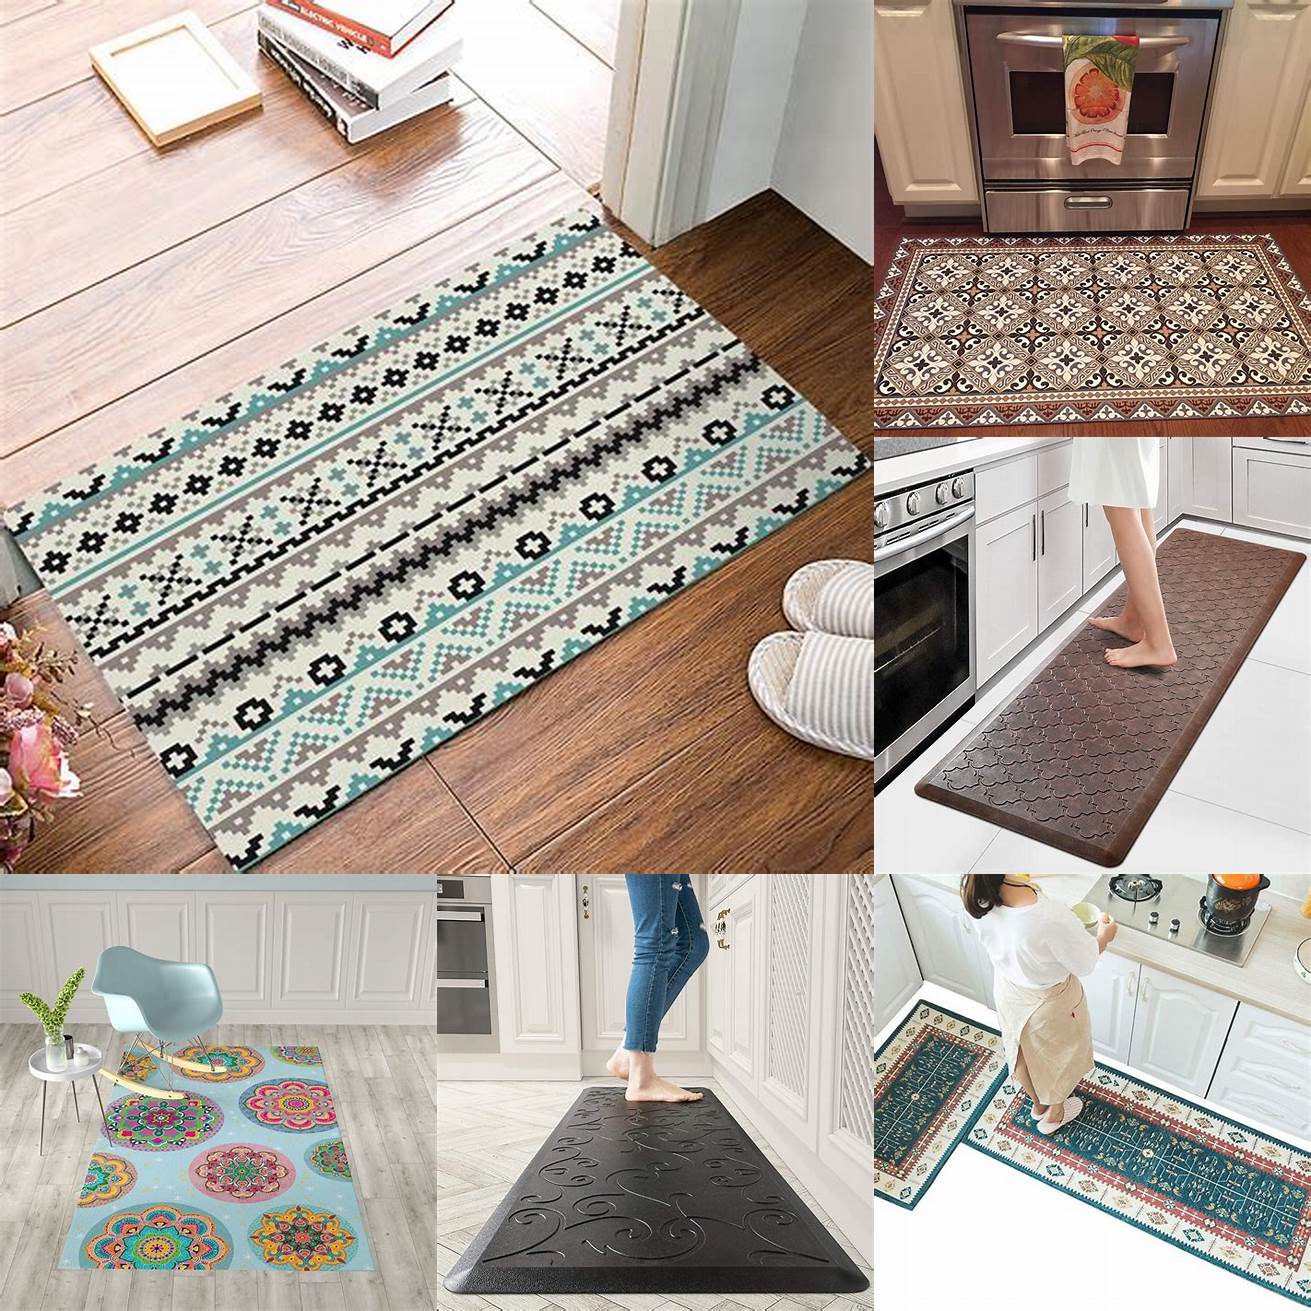 Decorative mats - Decorative mats come in a variety of colors patterns and designs They are ideal for those who want to add a touch of style to their kitchen